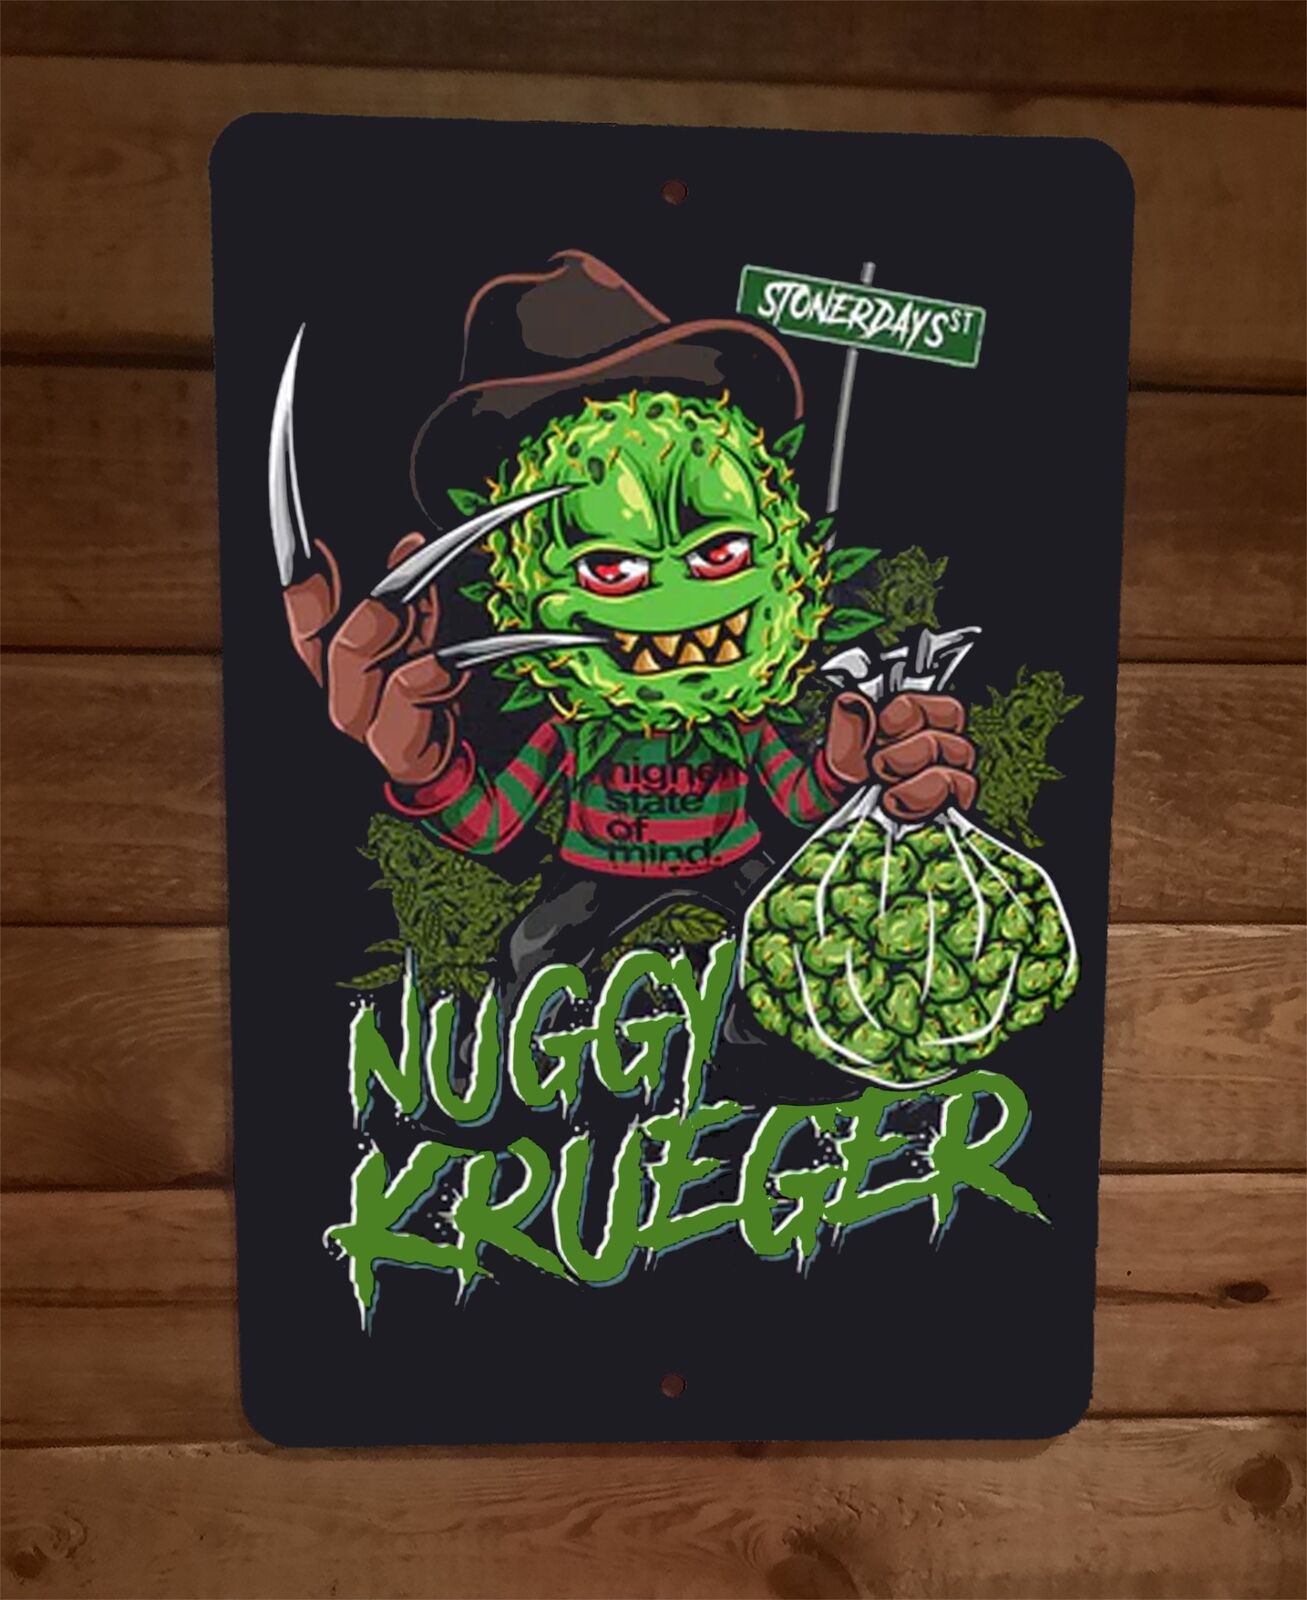 Nuggy Krueger 420 Mary Jane 8x12 Metal Wall Sign